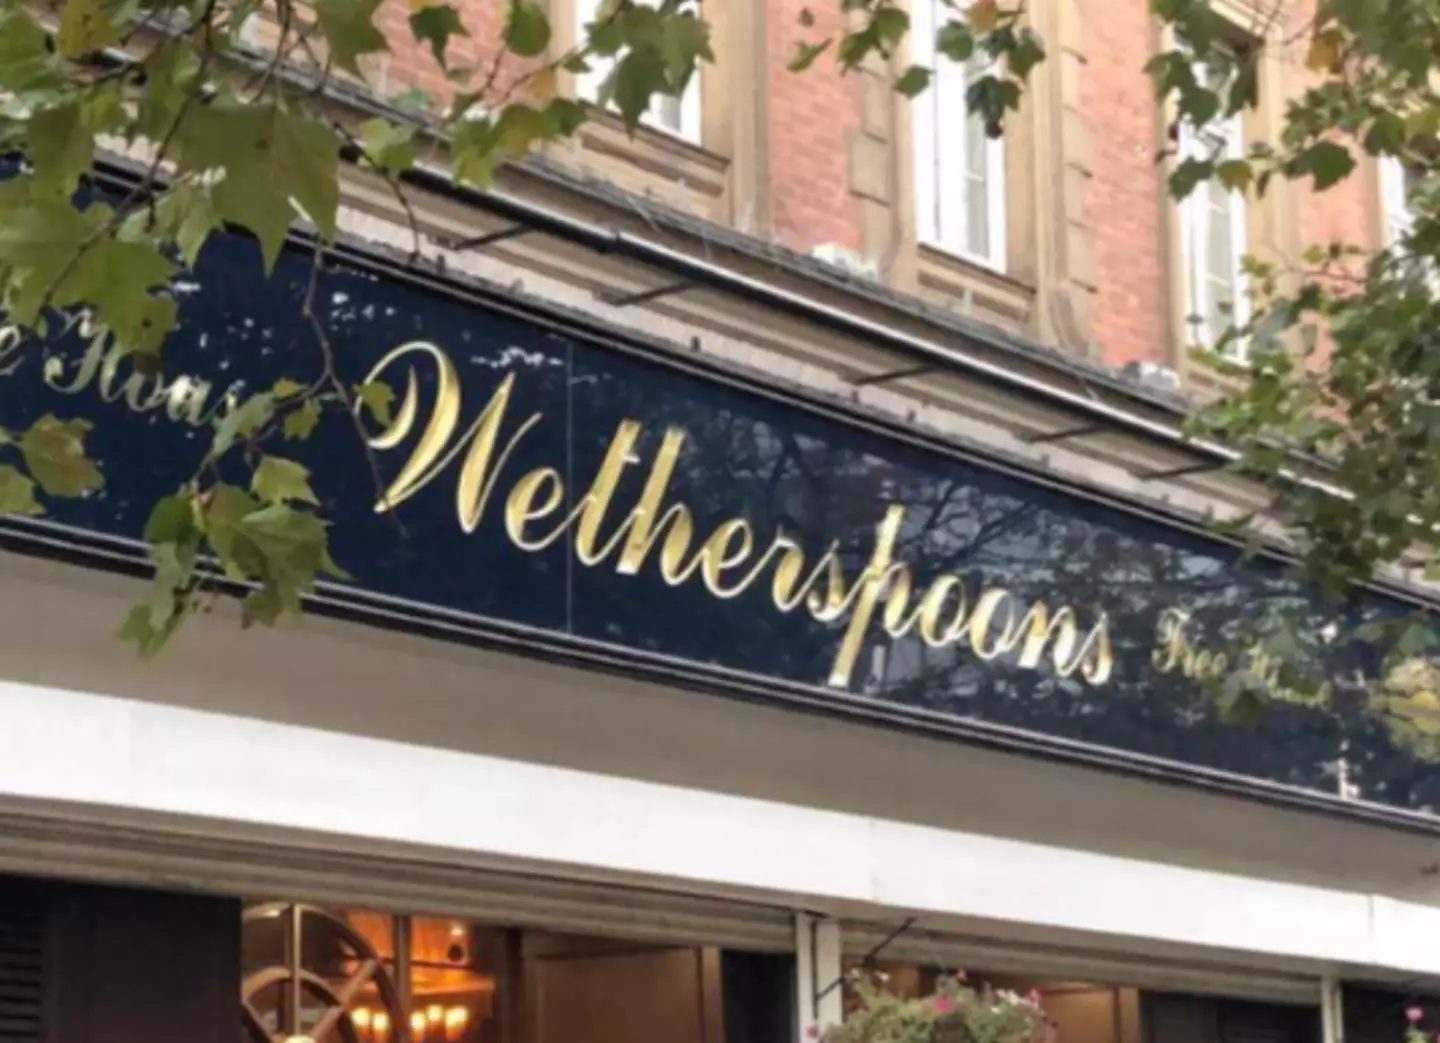 Speculation is rife that a Wetherspoons could be set to open in Marlow.